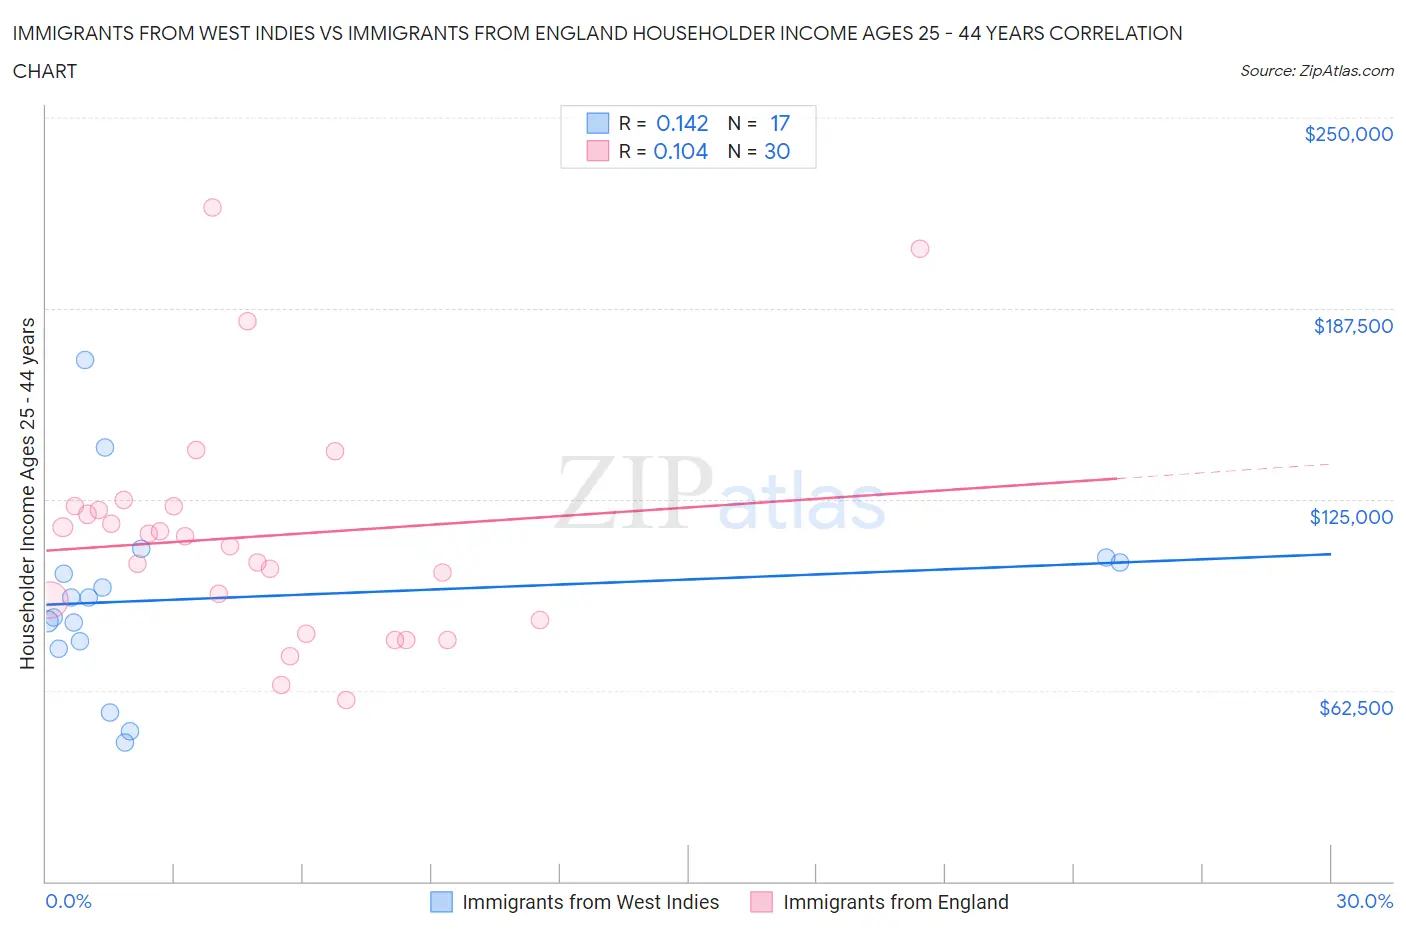 Immigrants from West Indies vs Immigrants from England Householder Income Ages 25 - 44 years